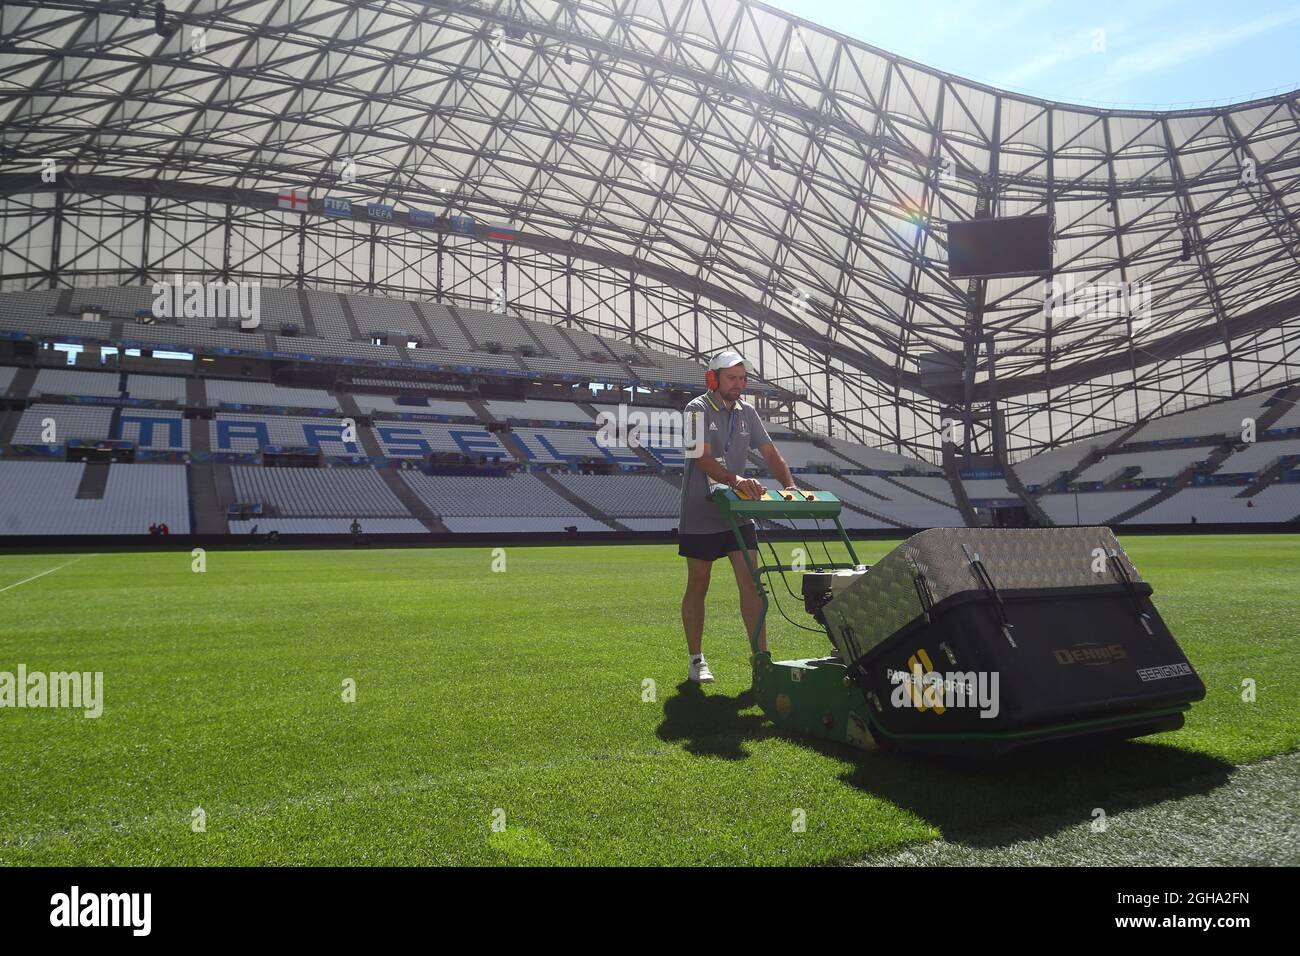 A view of the pitch at the Stade Velodrome, Marseille Stock Photo - Alamy